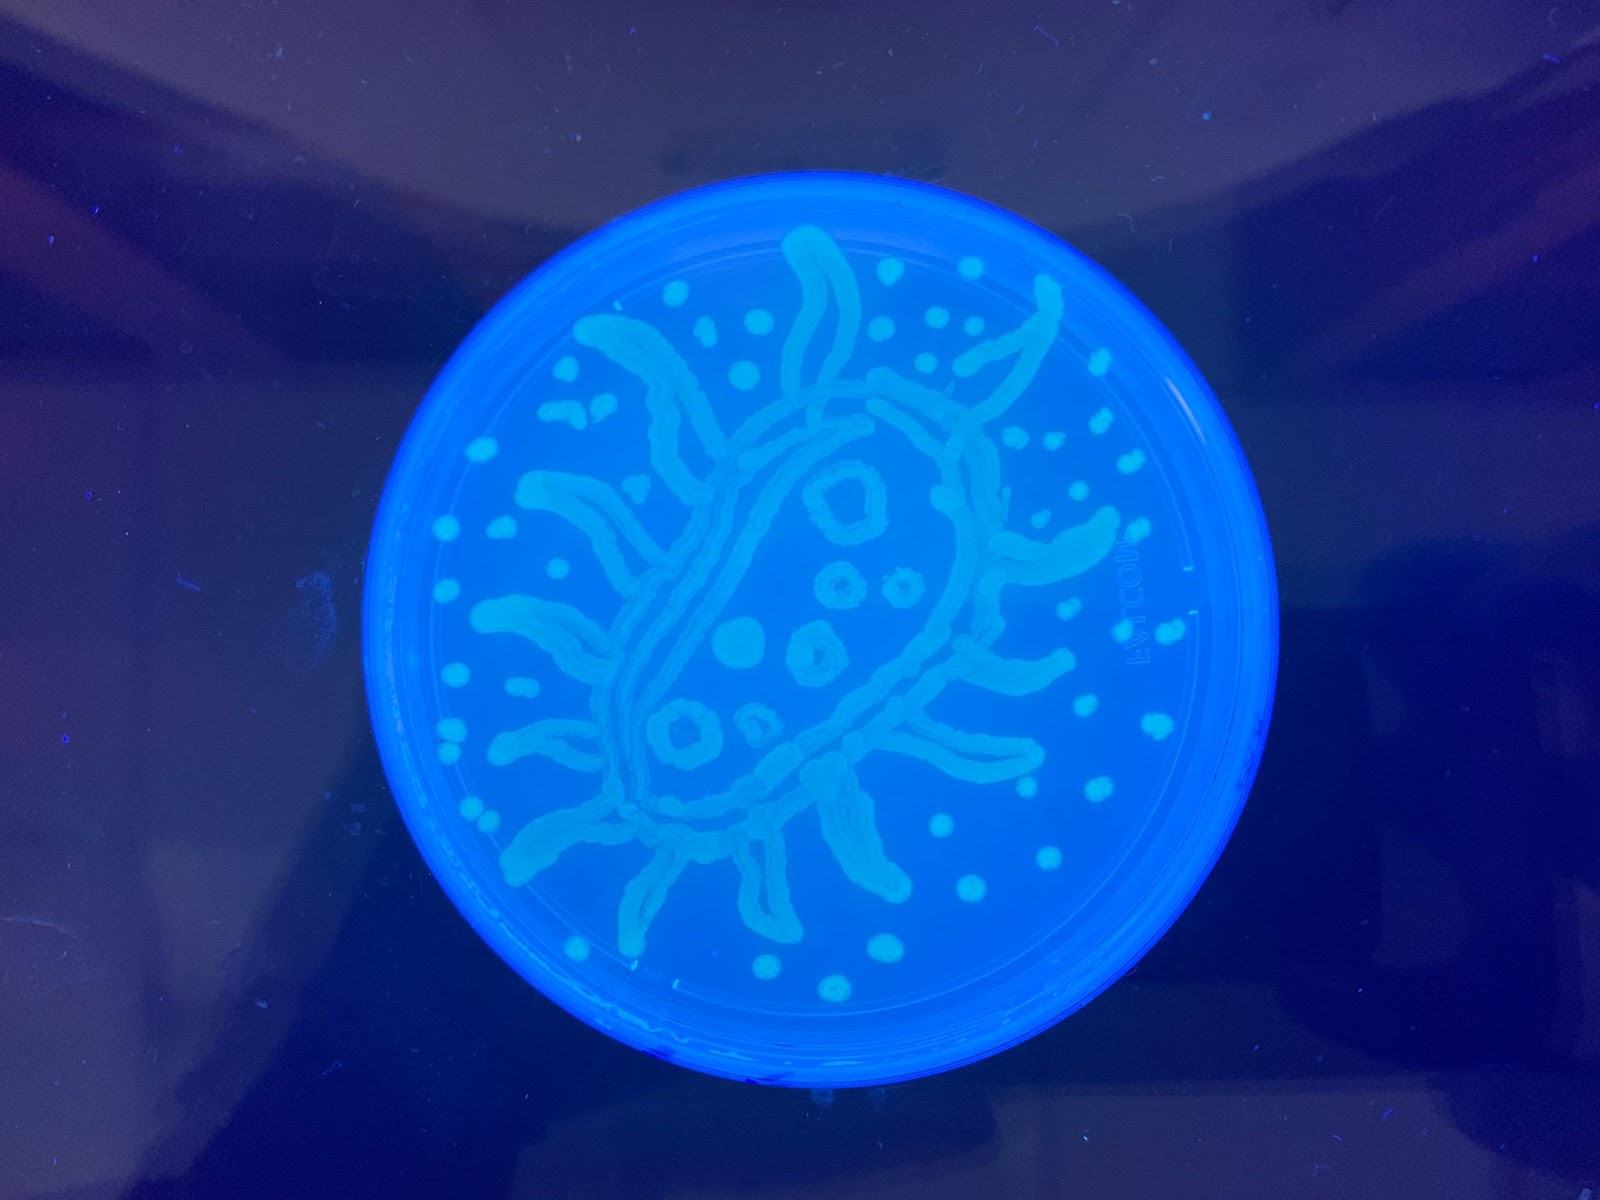 plate with bacteria glowing in the shape of a bacterium